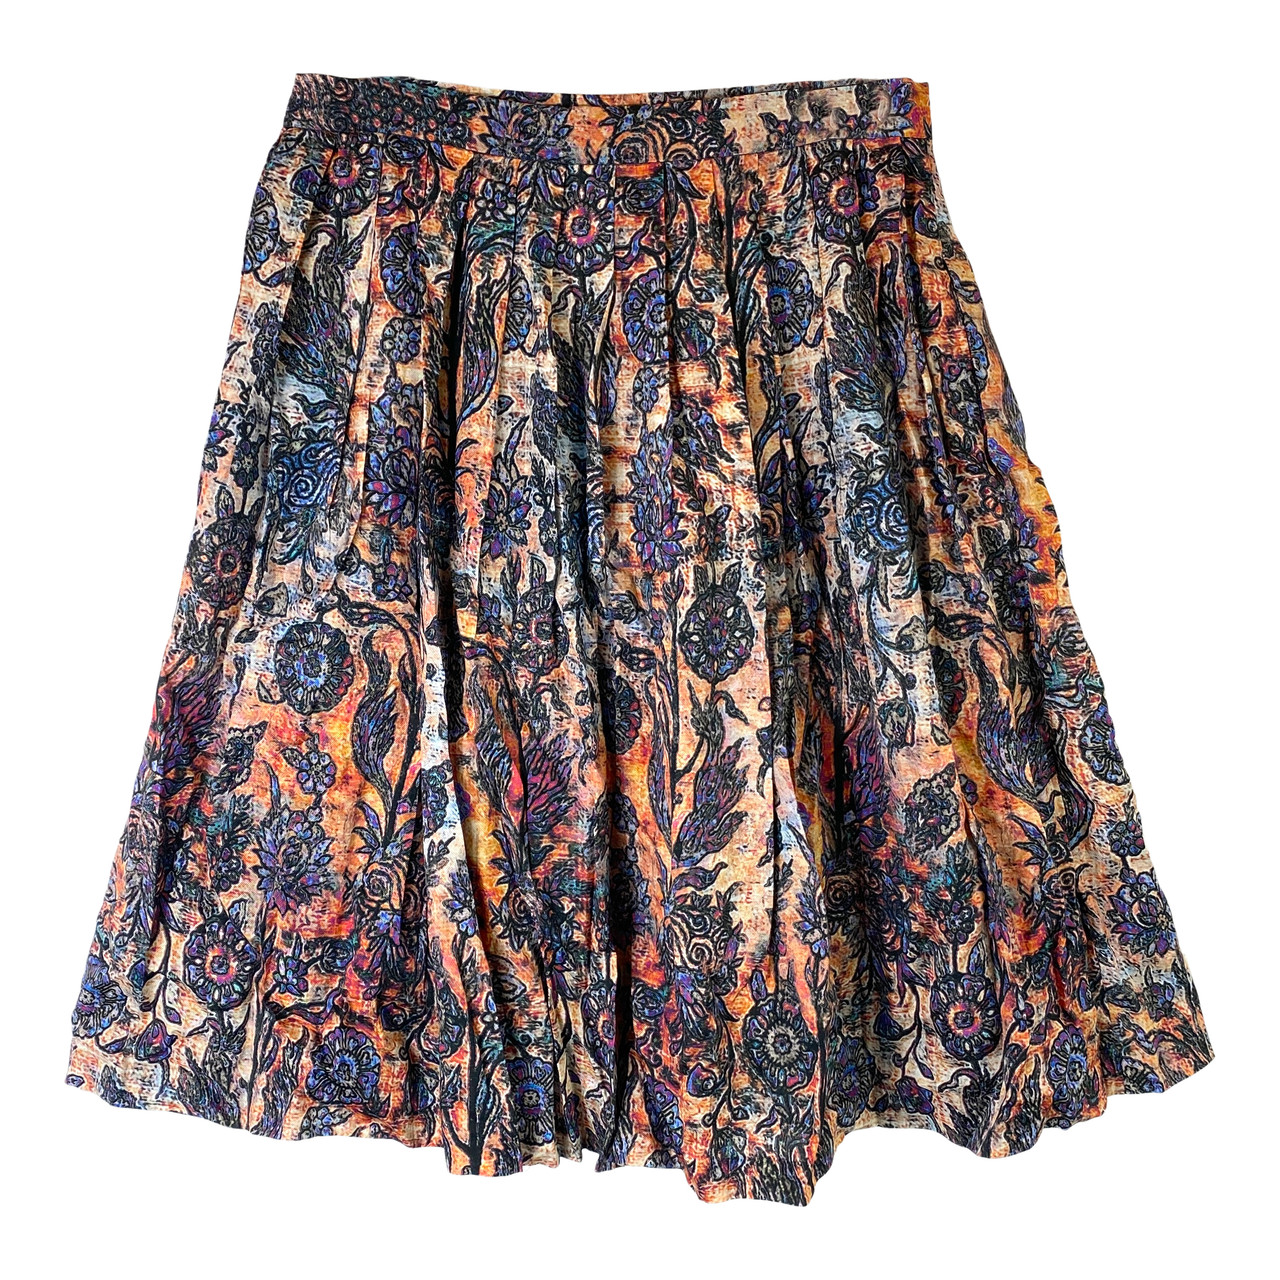 Peruvian Connection Graphic Floral Hilldale Skirt